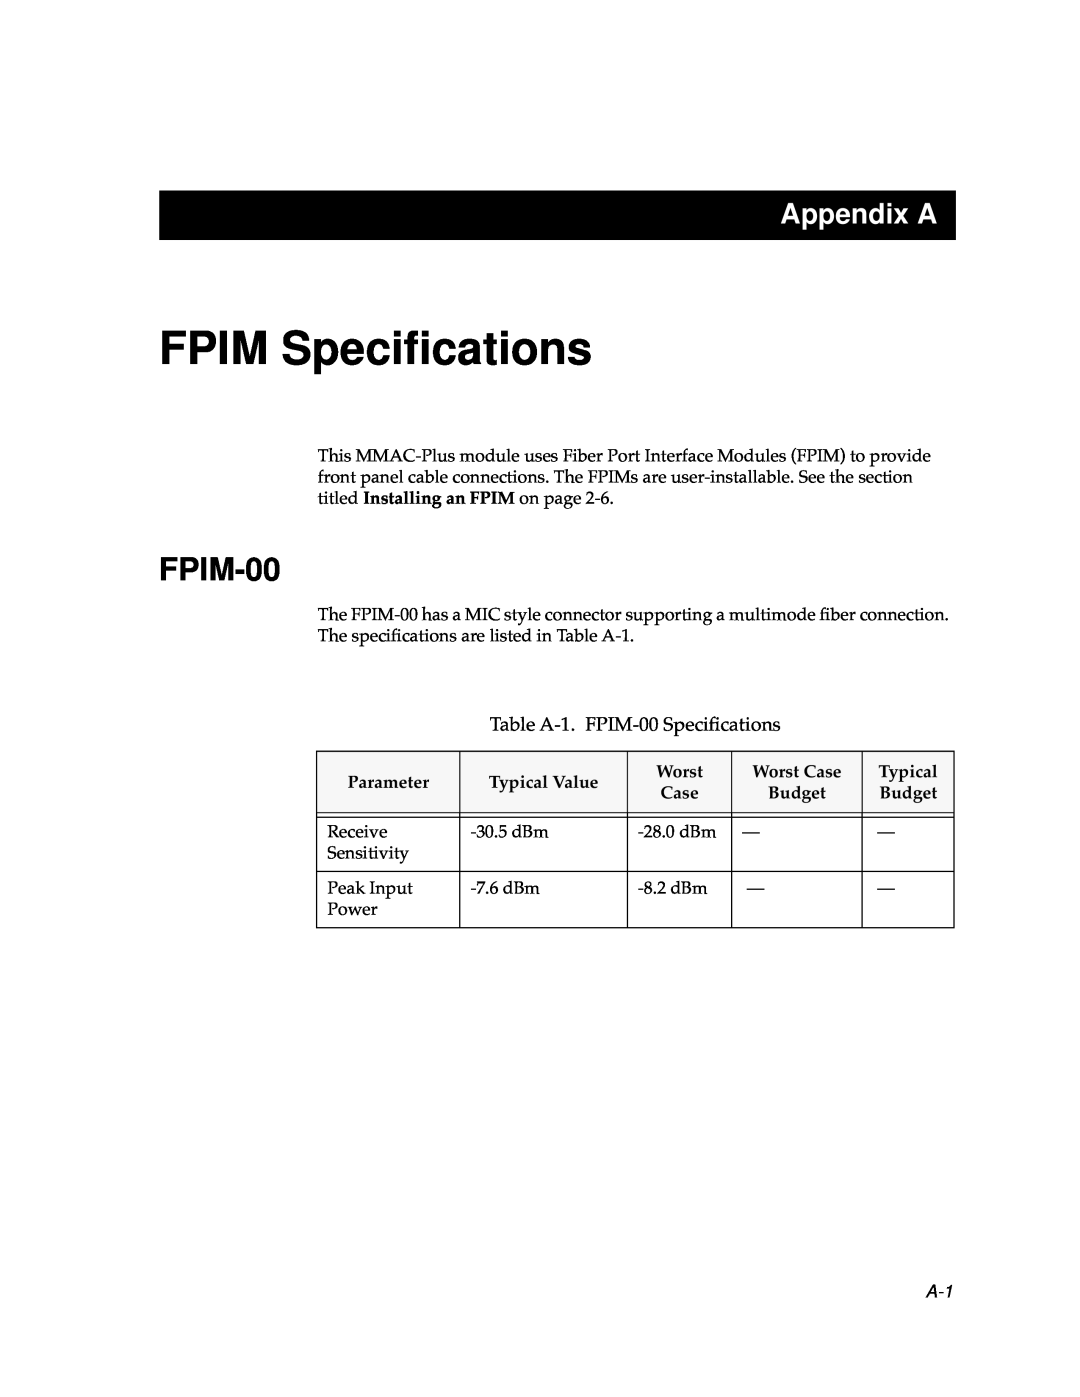 Cabletron Systems 9F106-01 FPIM Speciﬁcations, Appendix A, Table A-1. FPIM-00Speciﬁcations, Parameter, Typical Value 